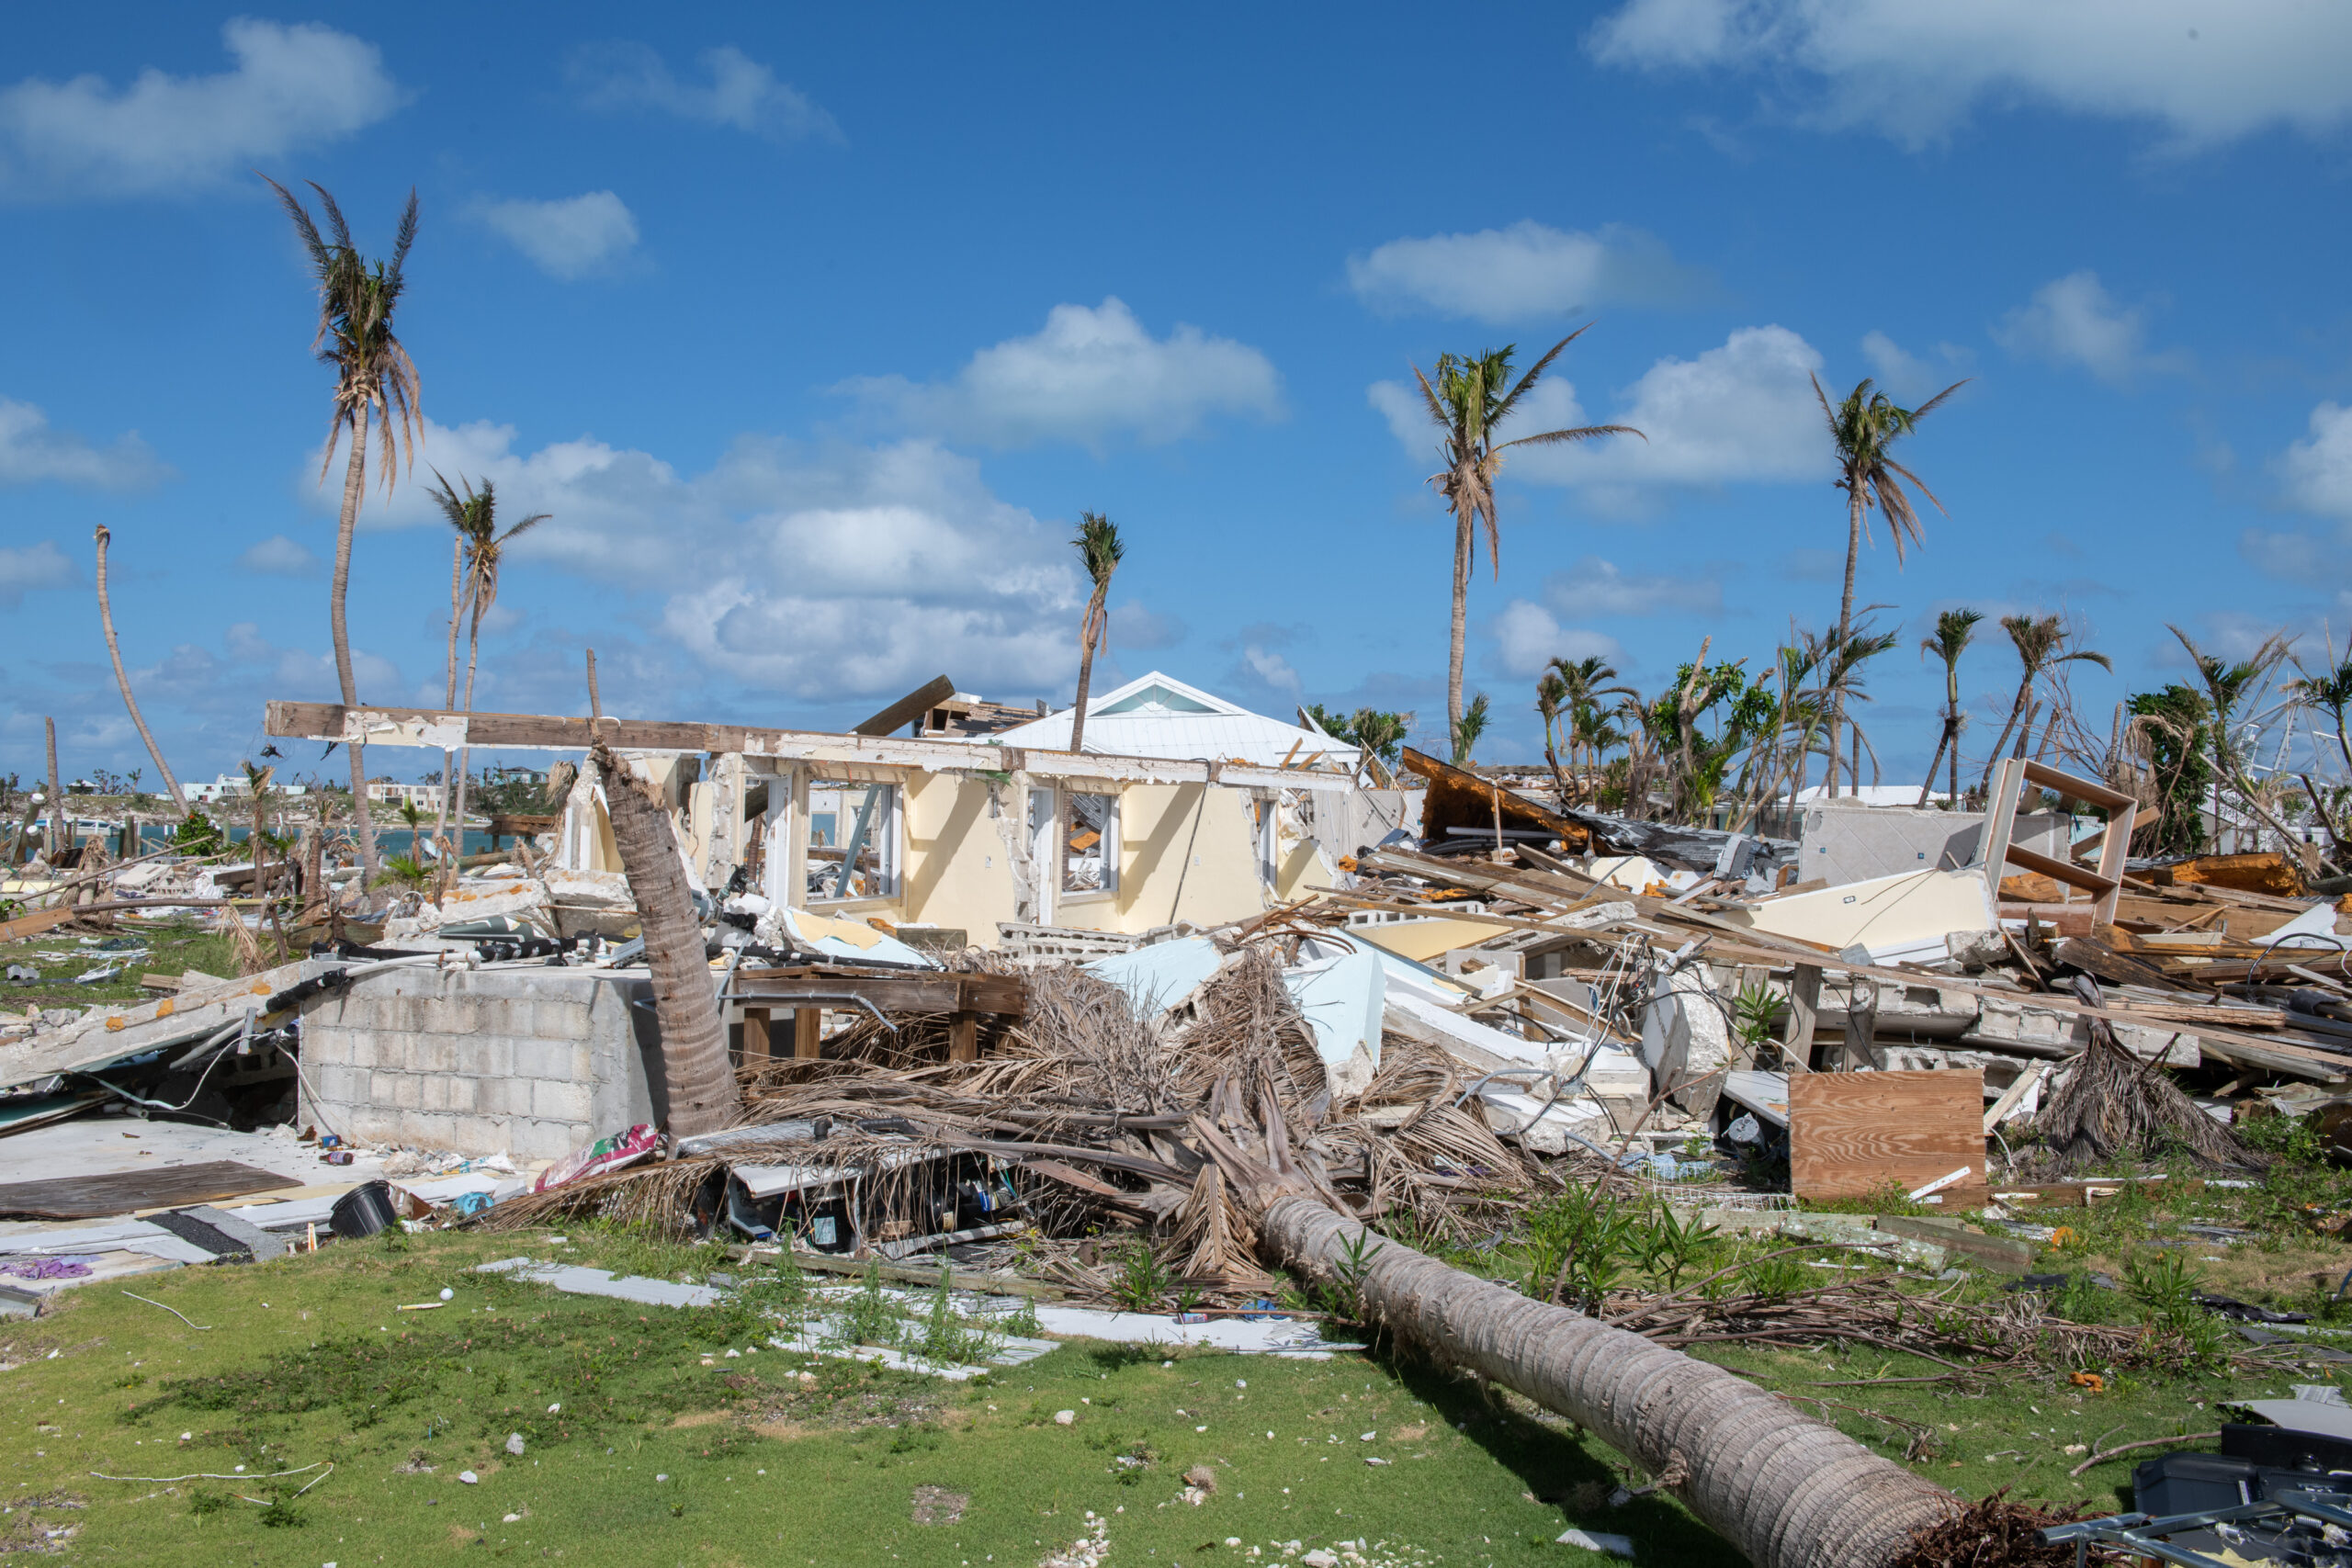 Image shows a house in rubble after being torn apart by a hurricane.